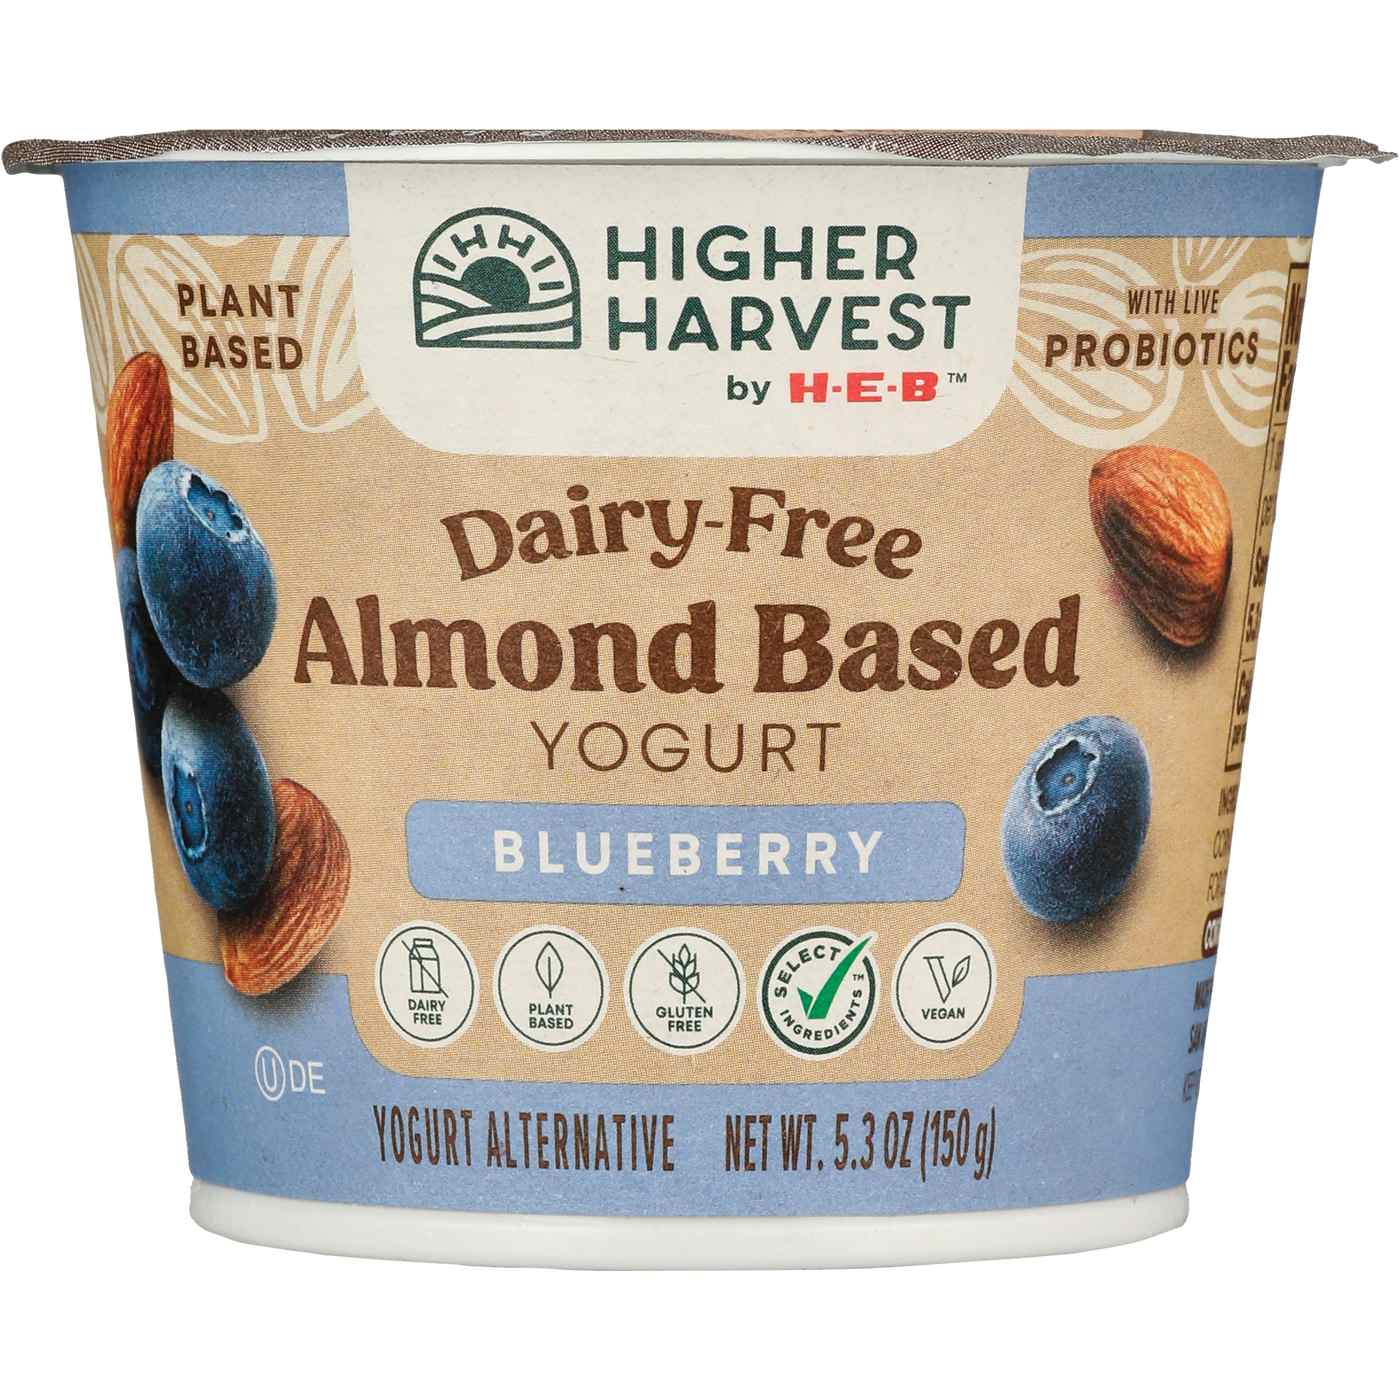 Higher Harvest by H-E-B Dairy-Free Almond-Based Yogurt – Blueberry; image 1 of 3